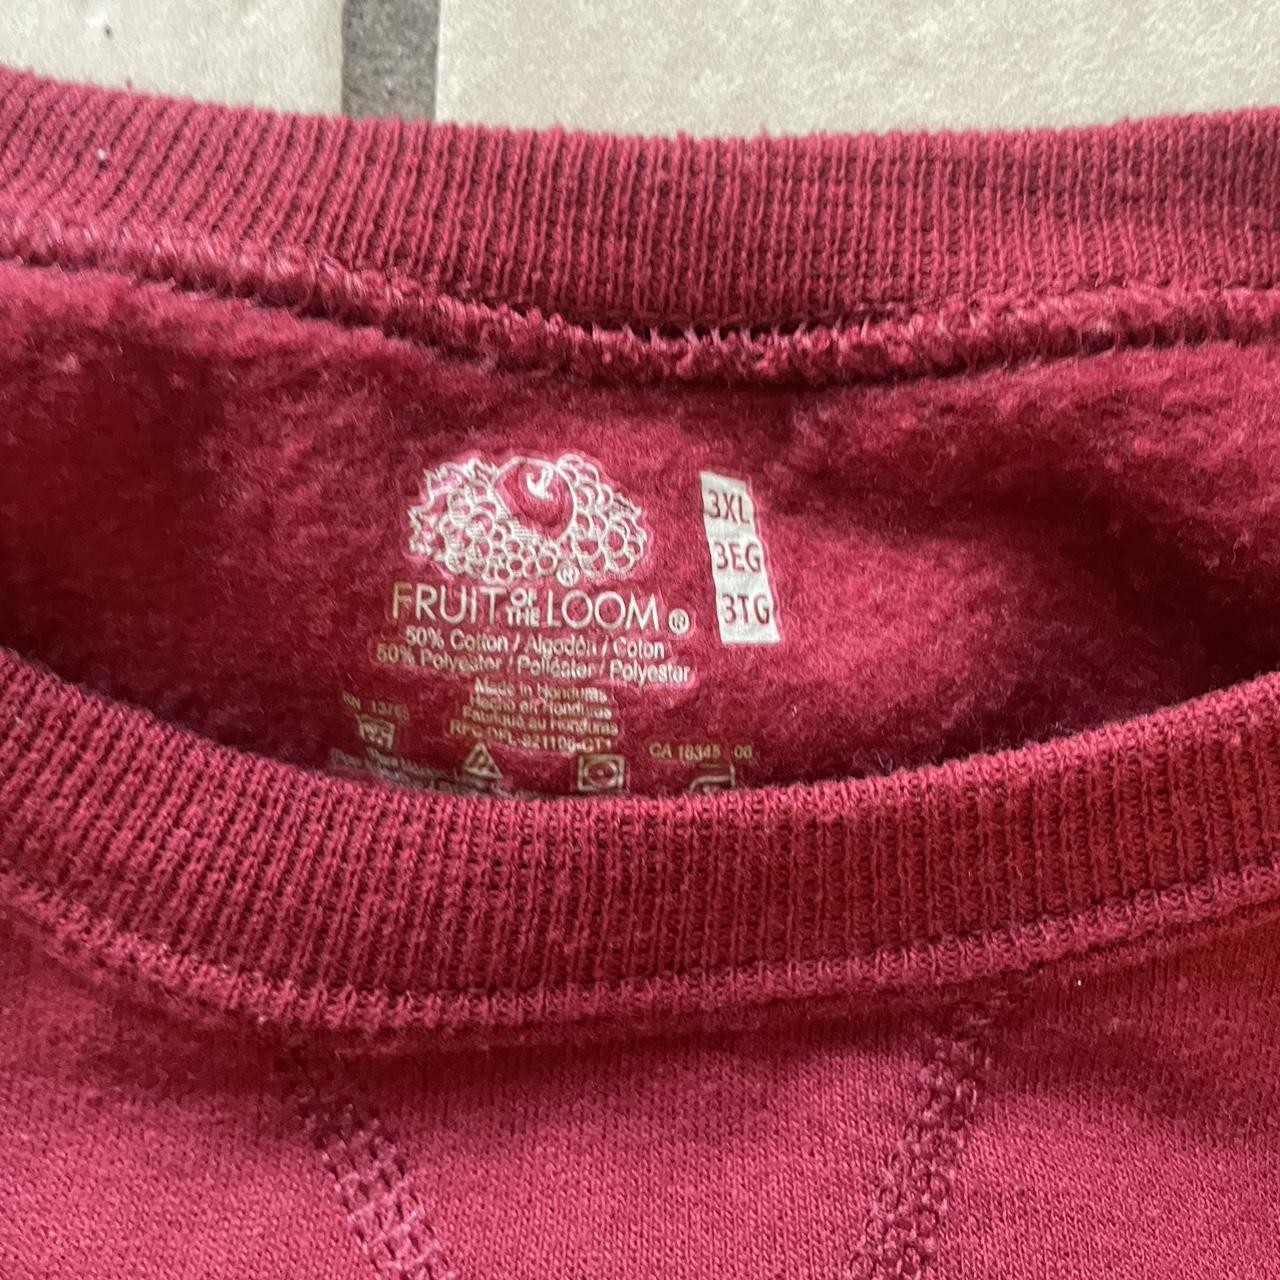 Blank all red fruit of the loom crew neck size 3xl - Depop